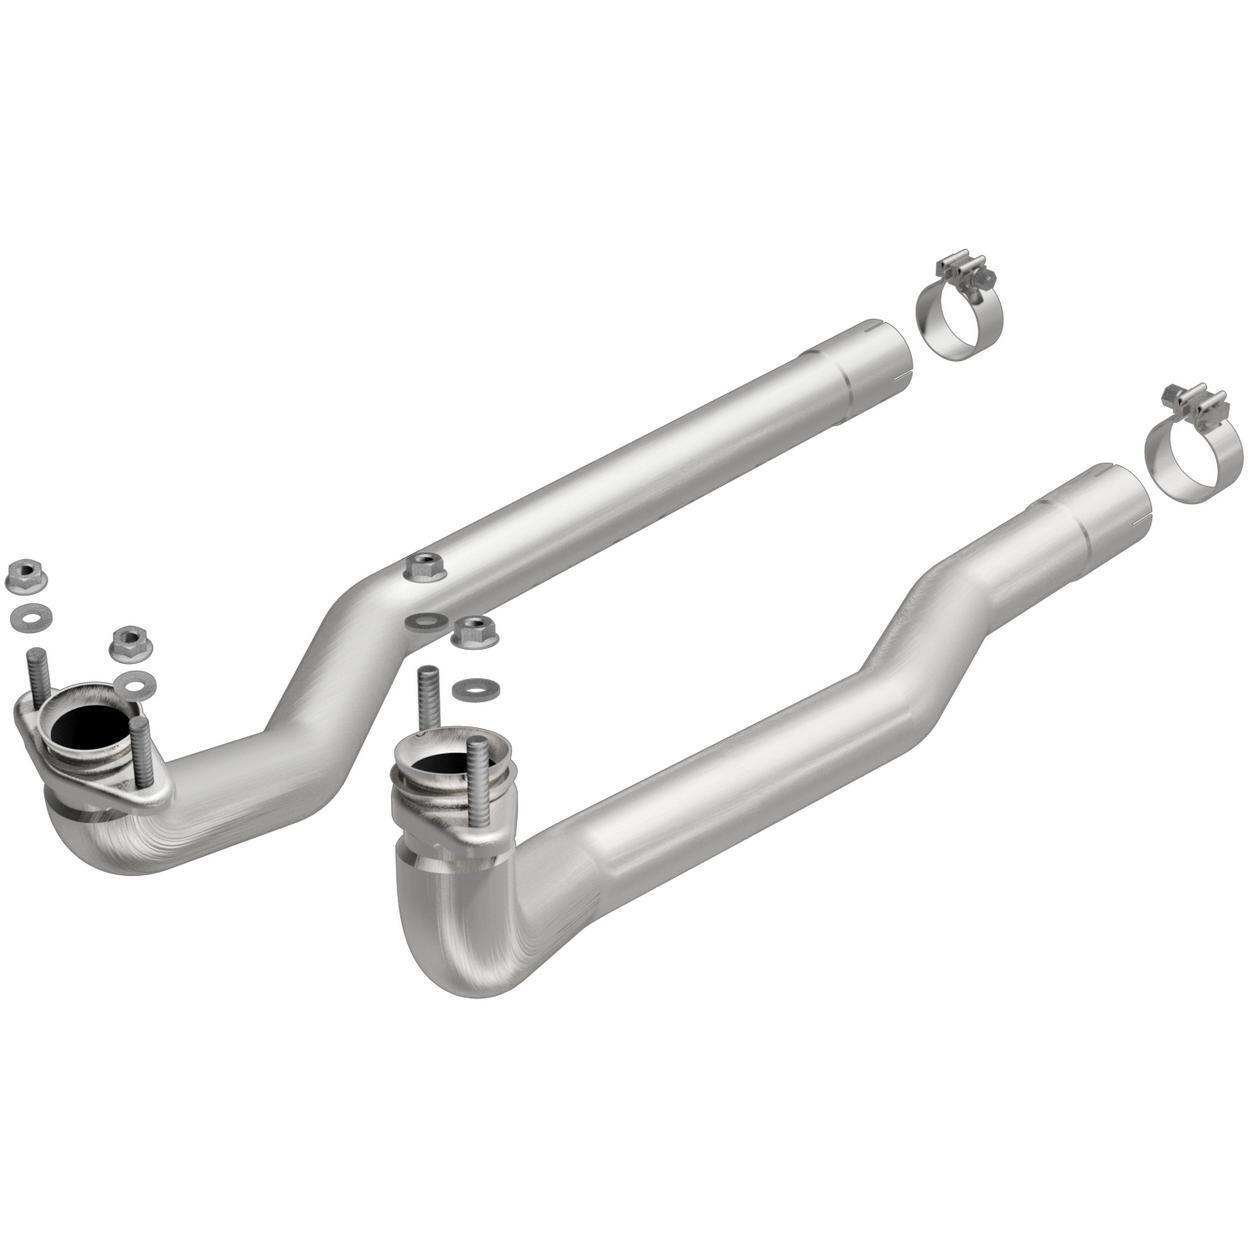 MagnaFlow 19343-HS Fits 1979 Chrysler Cordoba Exhaust Pipe